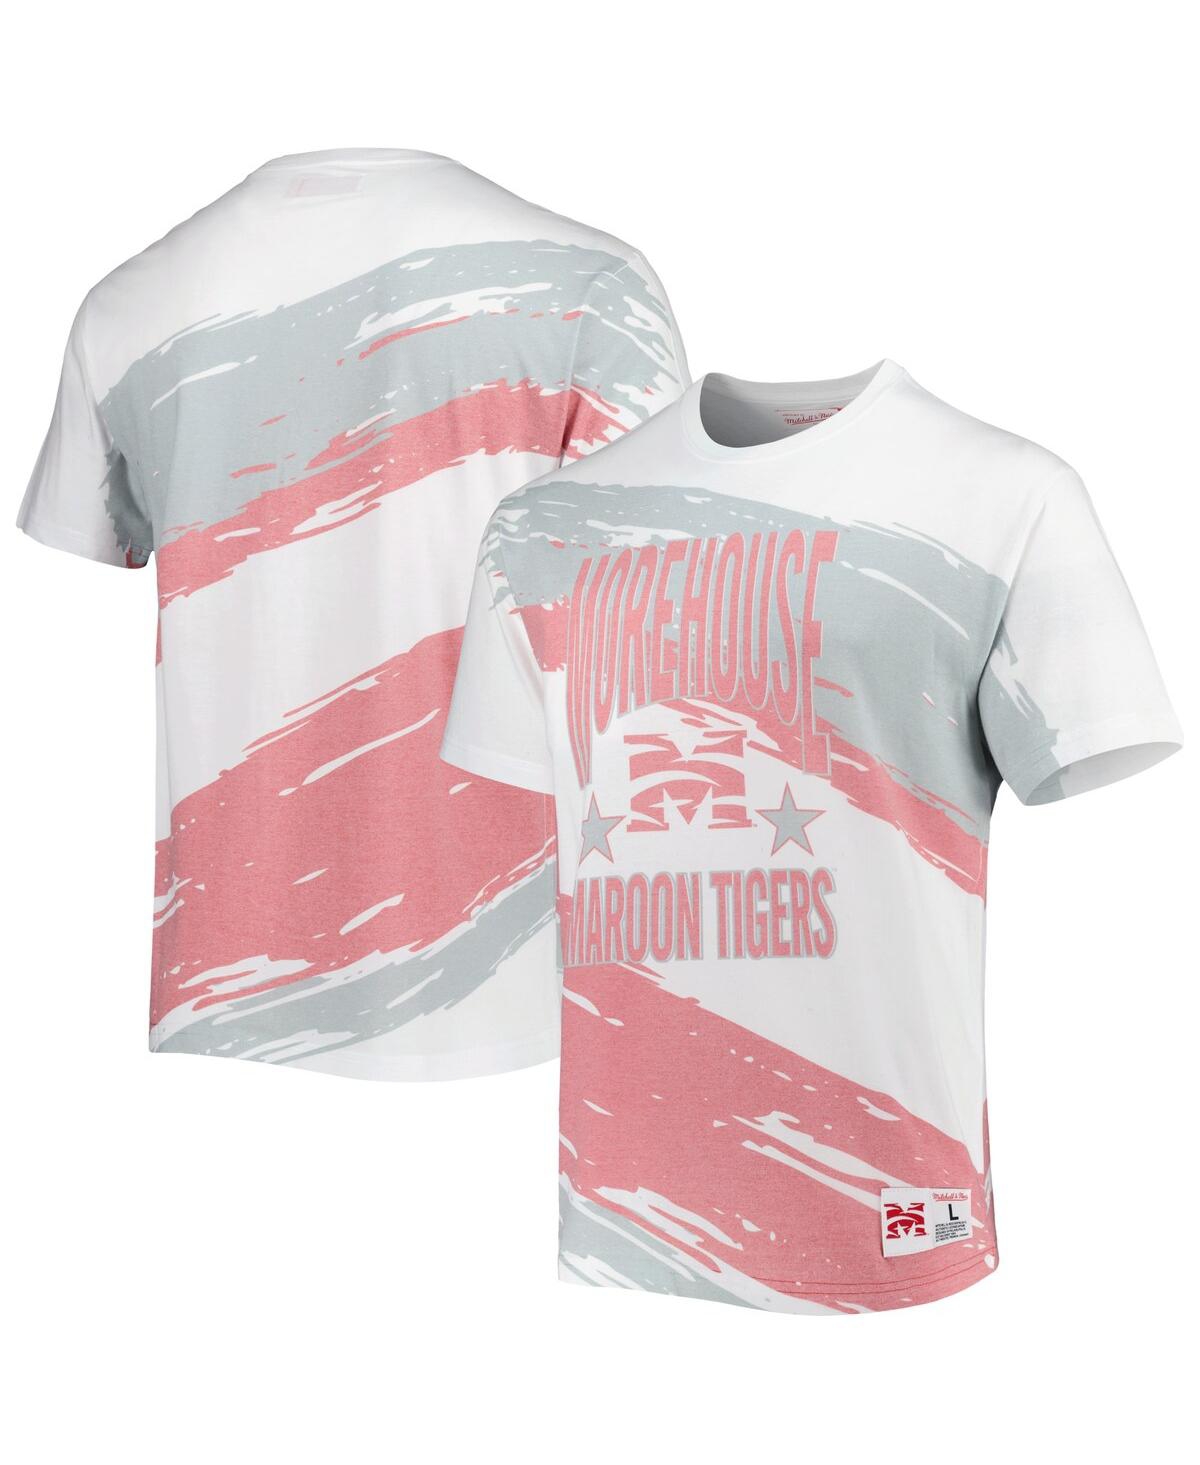 MITCHELL & NESS MEN'S MITCHELL & NESS WHITE MOREHOUSE MAROON TIGERS PAINTBRUSH SUBLIMATED T-SHIRT